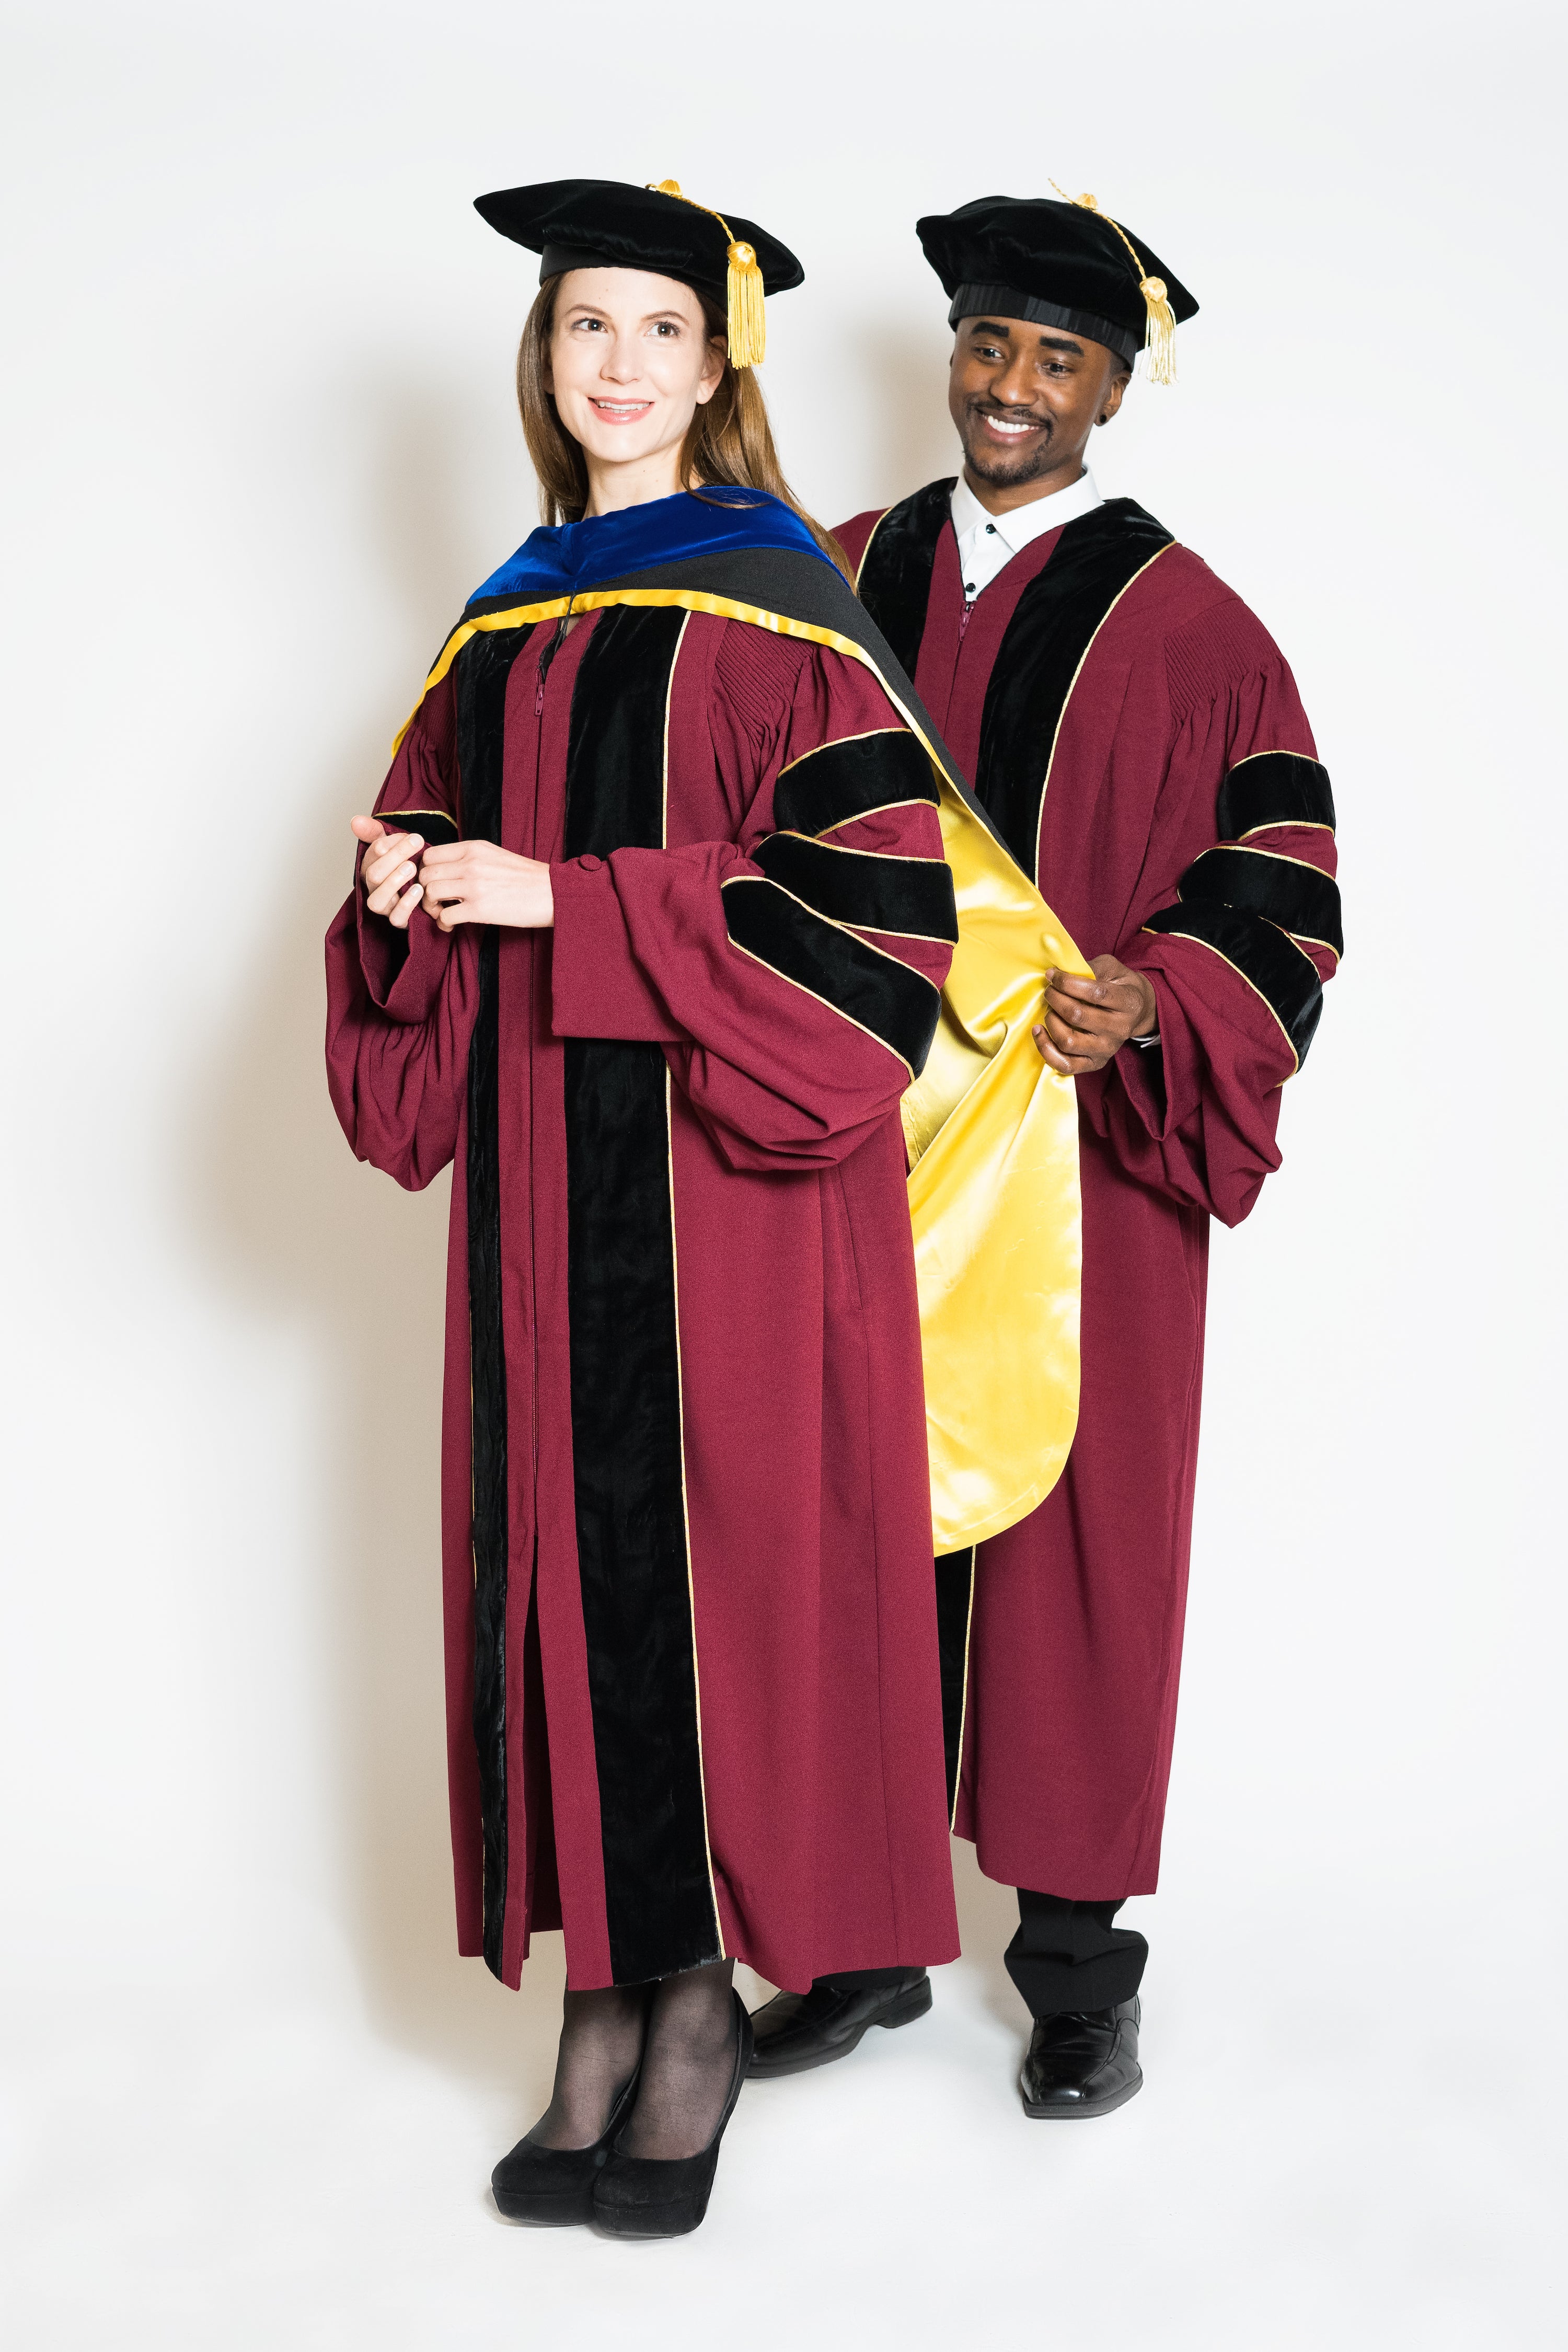 how much does phd regalia cost